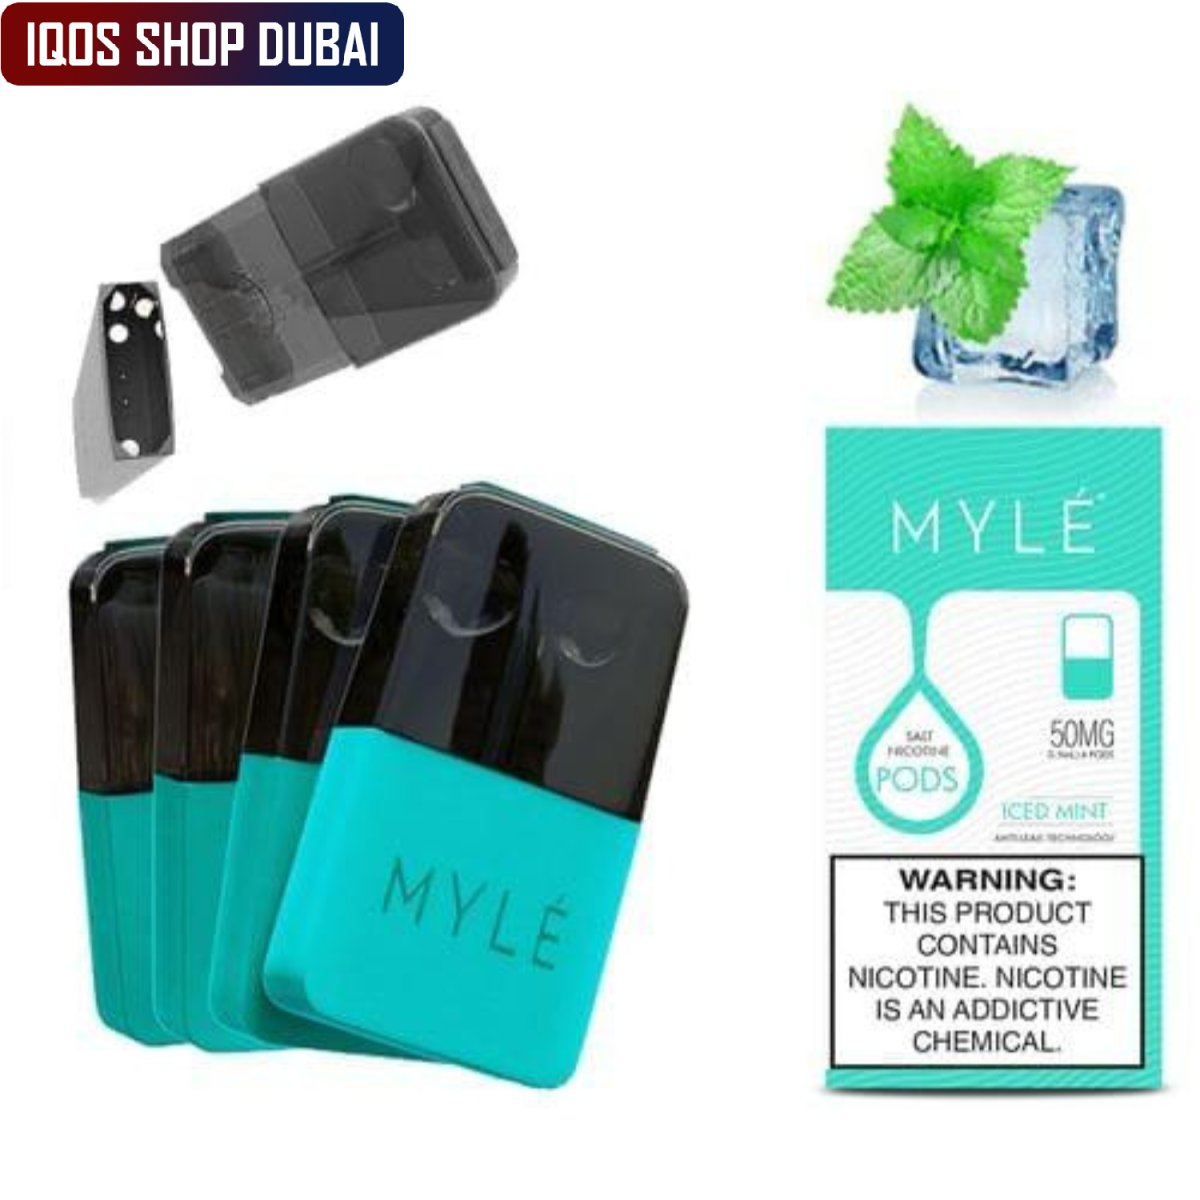 MYLE V4 ICED MINT Flavor Magnetic PODS 50mg in UAE